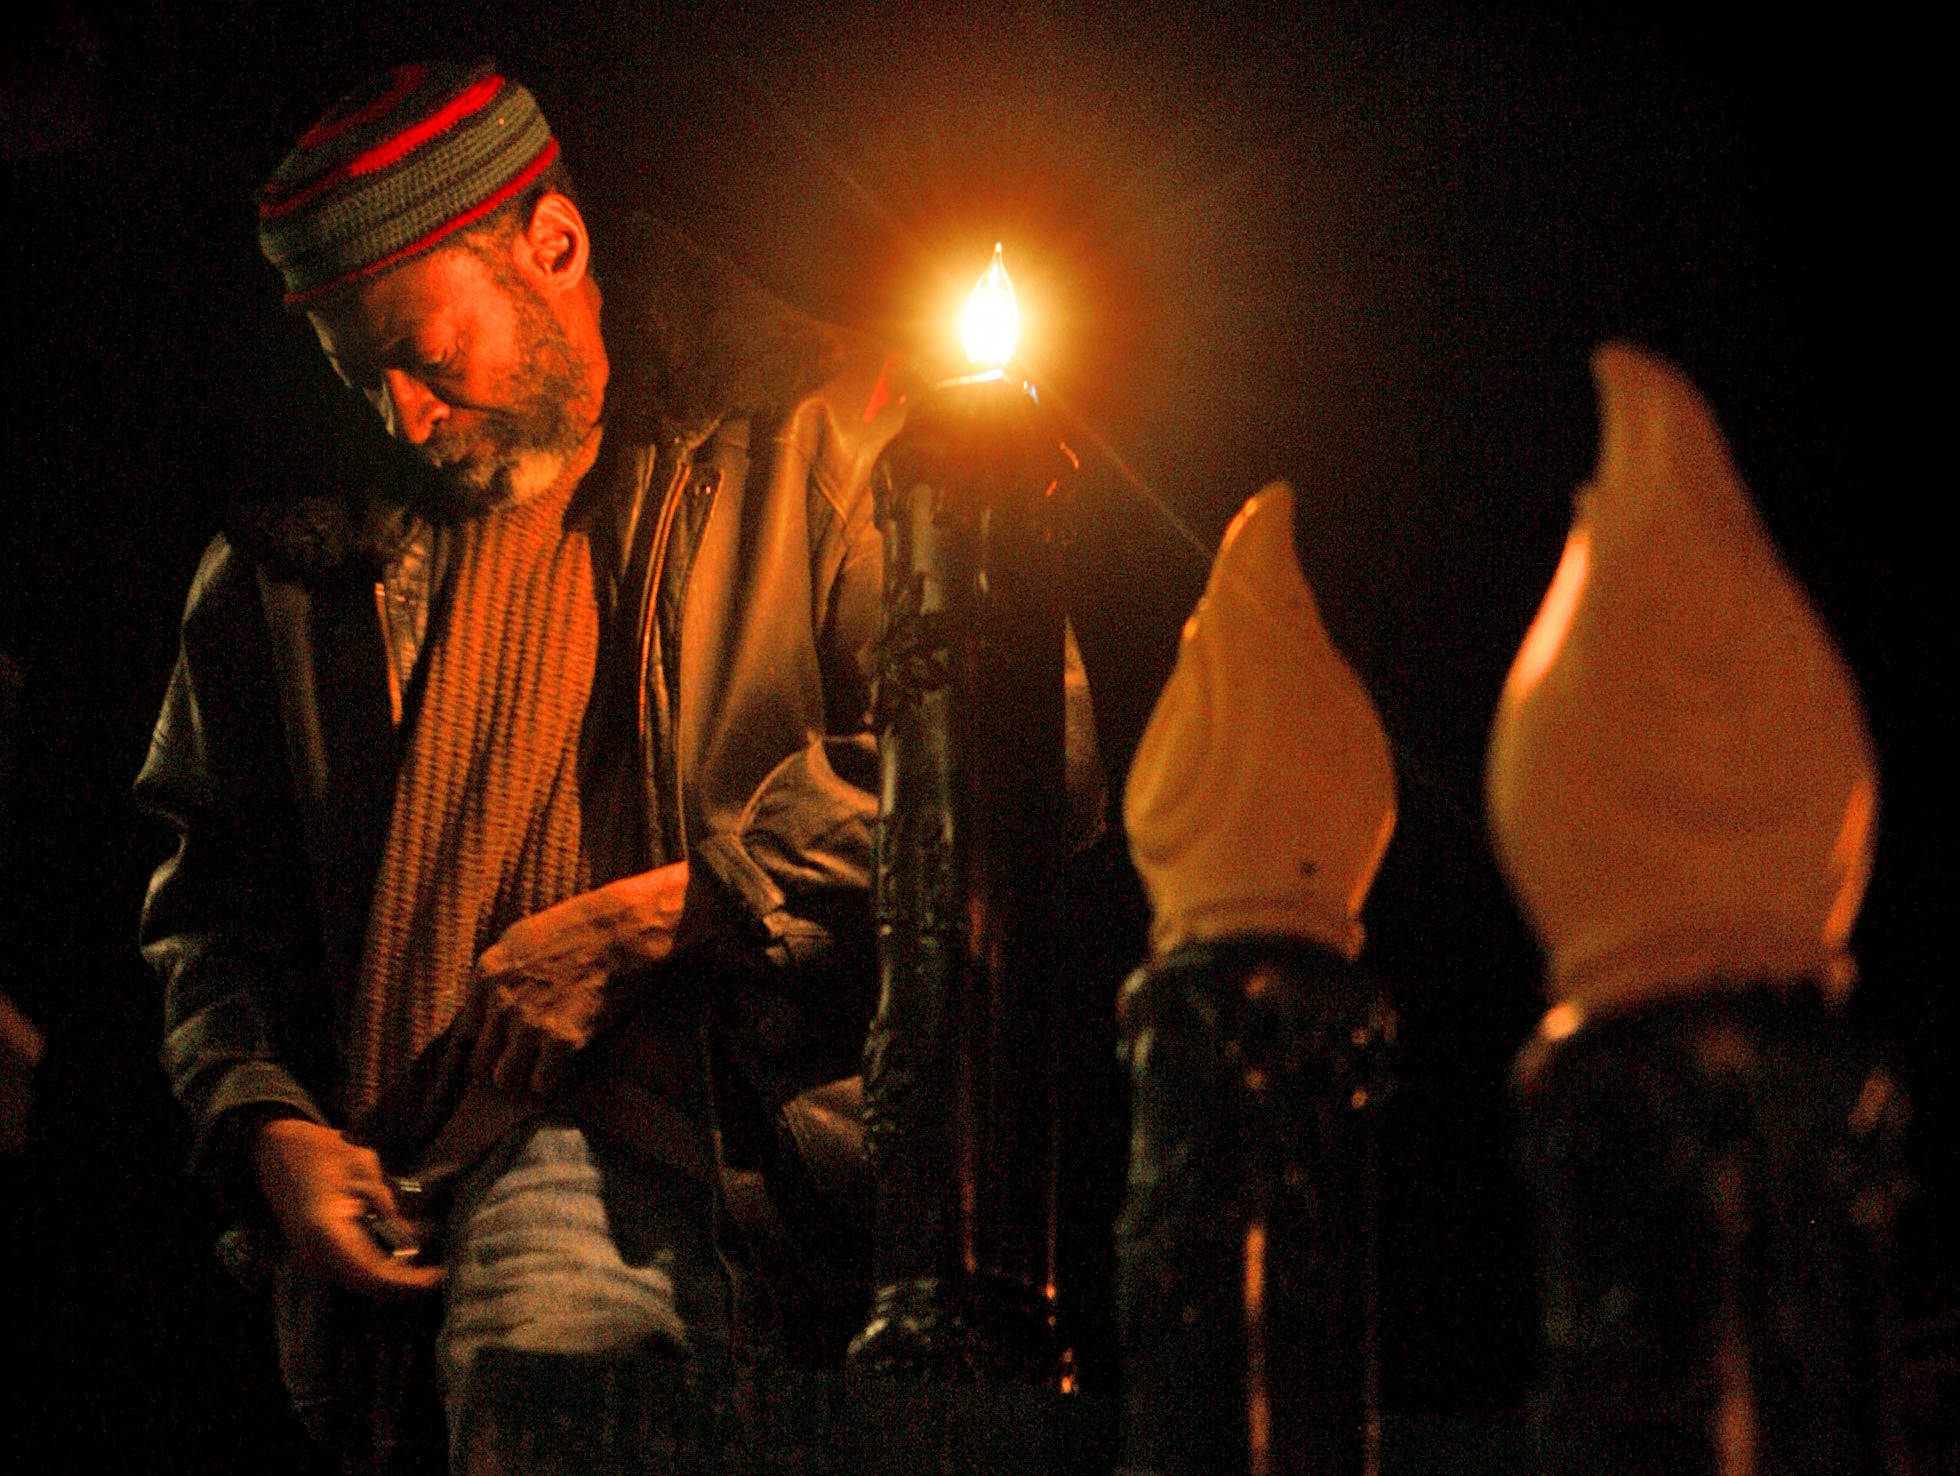 Photo of an African American man standing next to tall candle ornaments , the body of which have been painted black and the reproduction "flames" are yellow. The tallest candle decoration has a bare light bulb where the "flame" cover should go, and the man is testing the light bulbs to make sure they are functioning properly. He is wearing a crocheted cap in with red, black, and gray horizontal stripes, and a black leather bomber-style jacket with jeans and a golden yellow sweater. It is night time.